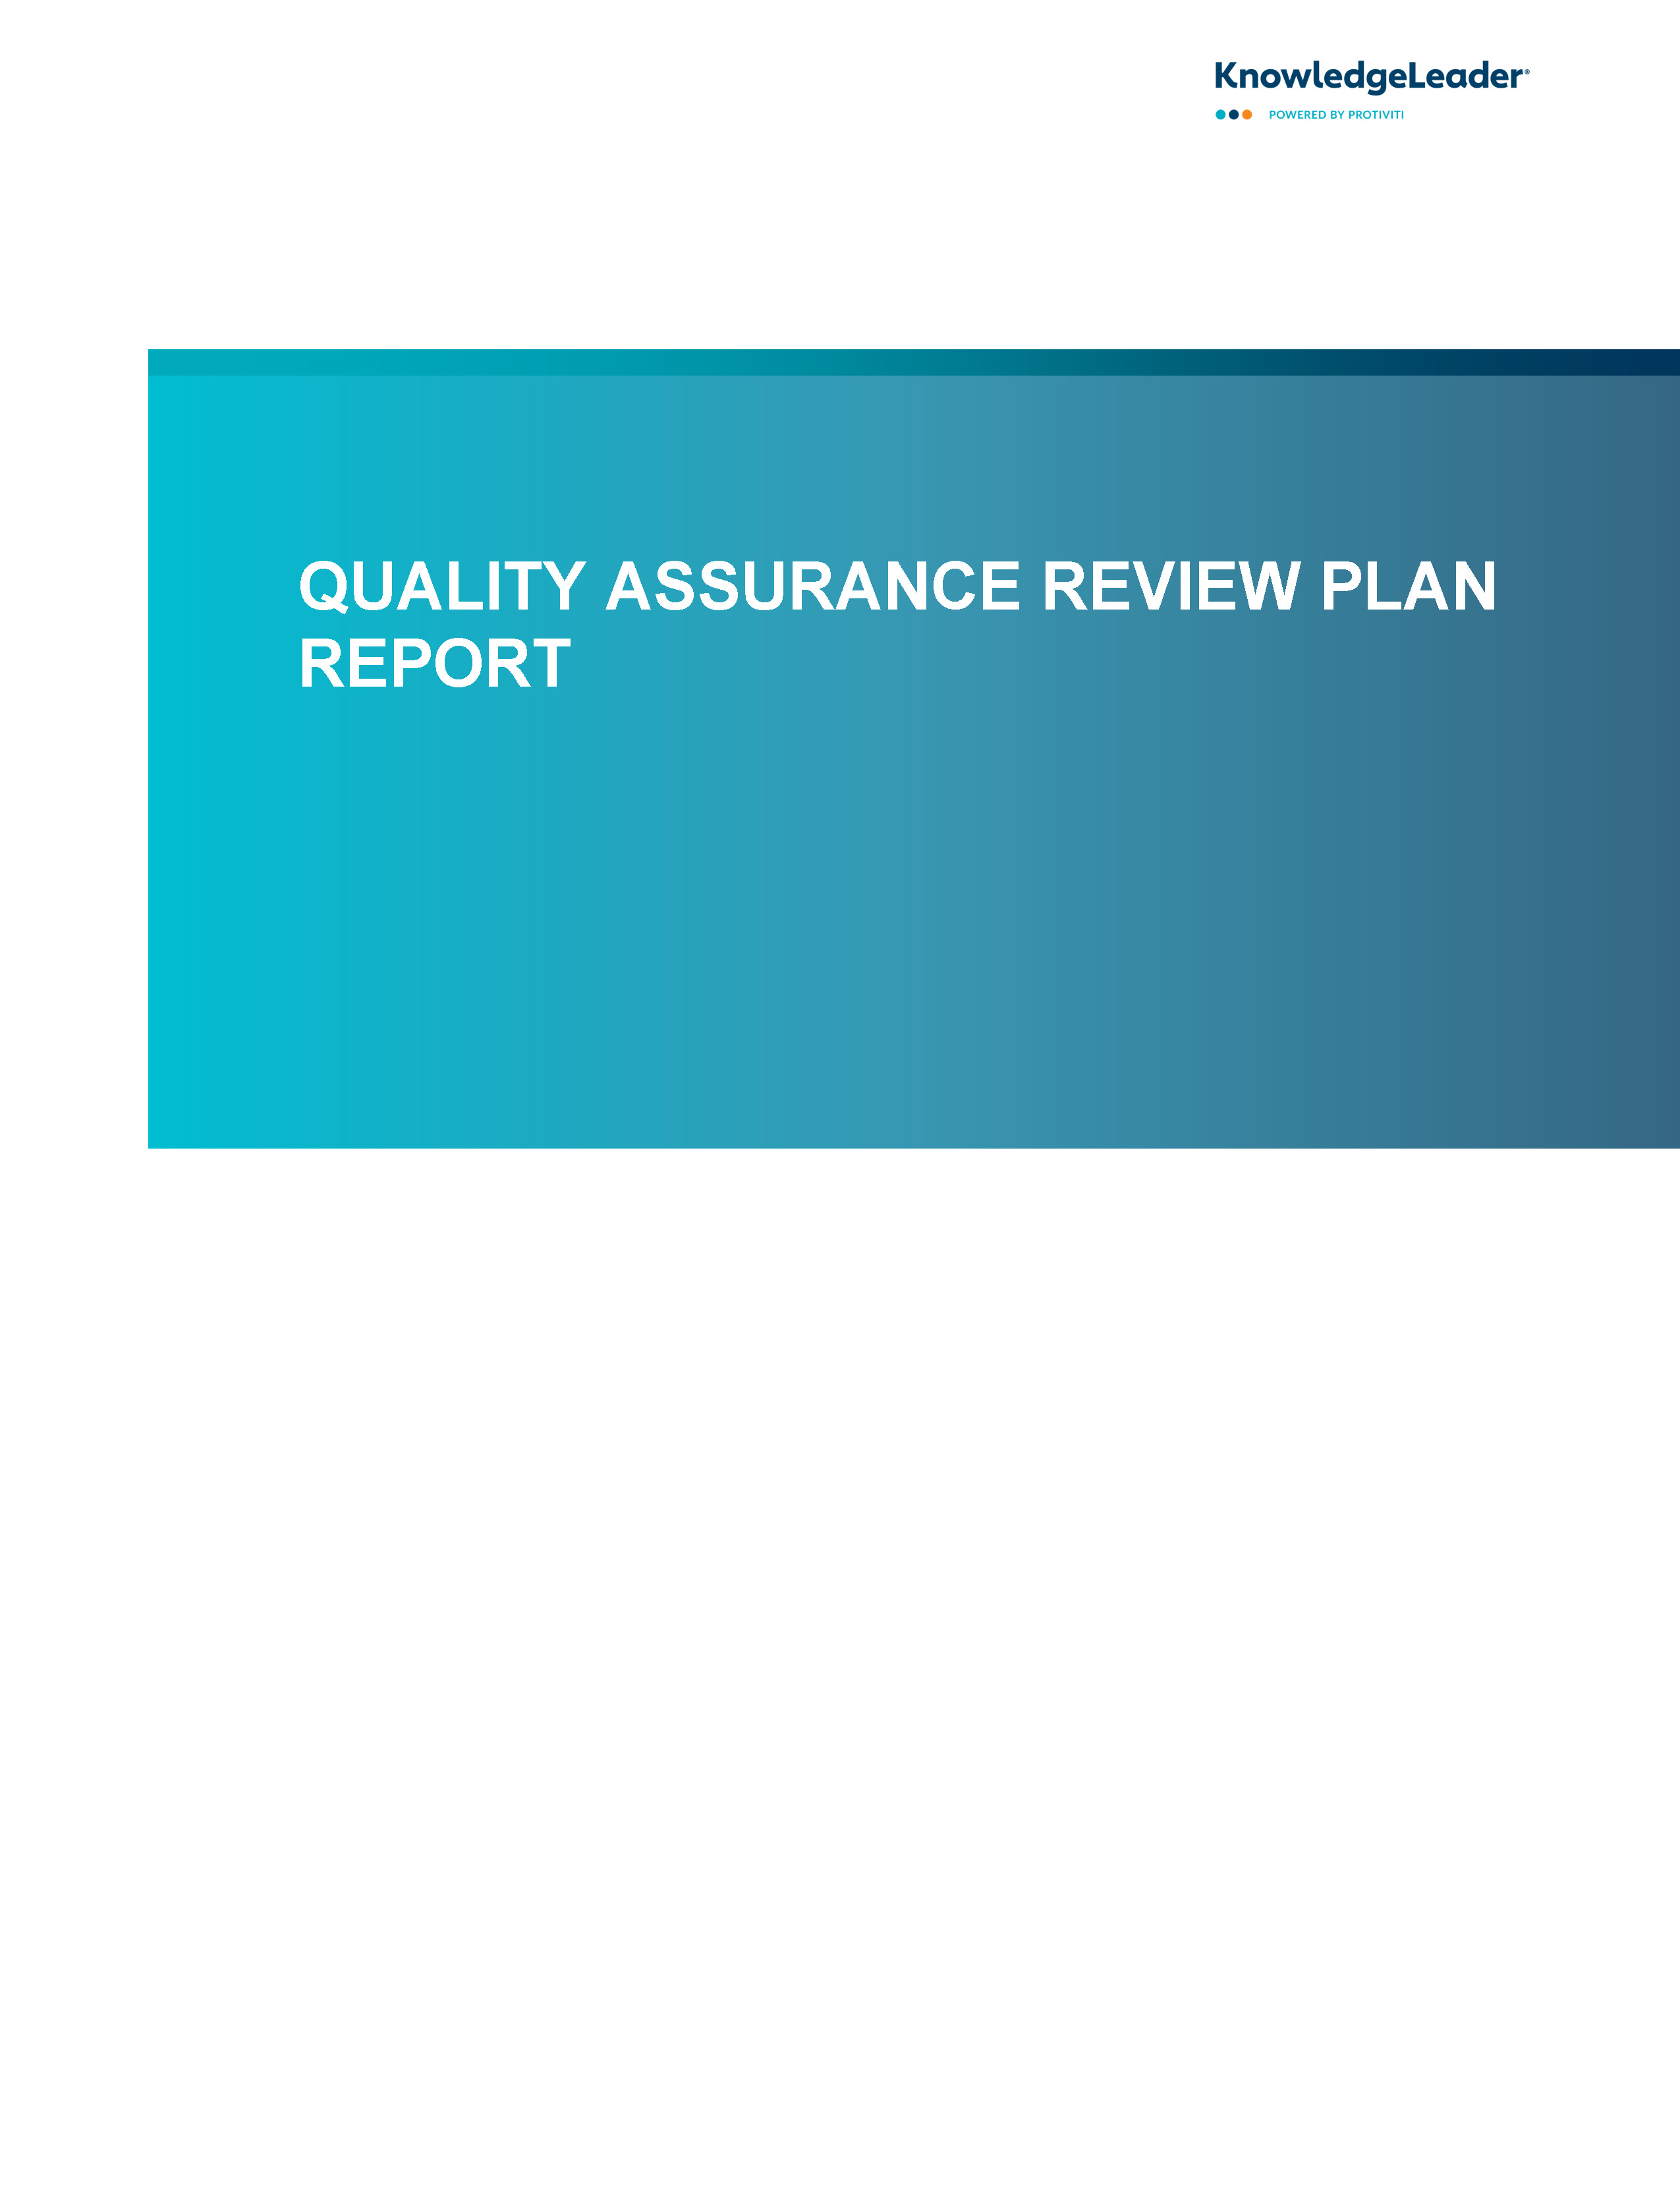 screenshot of the first page of Quality Assurance Review Plan Report